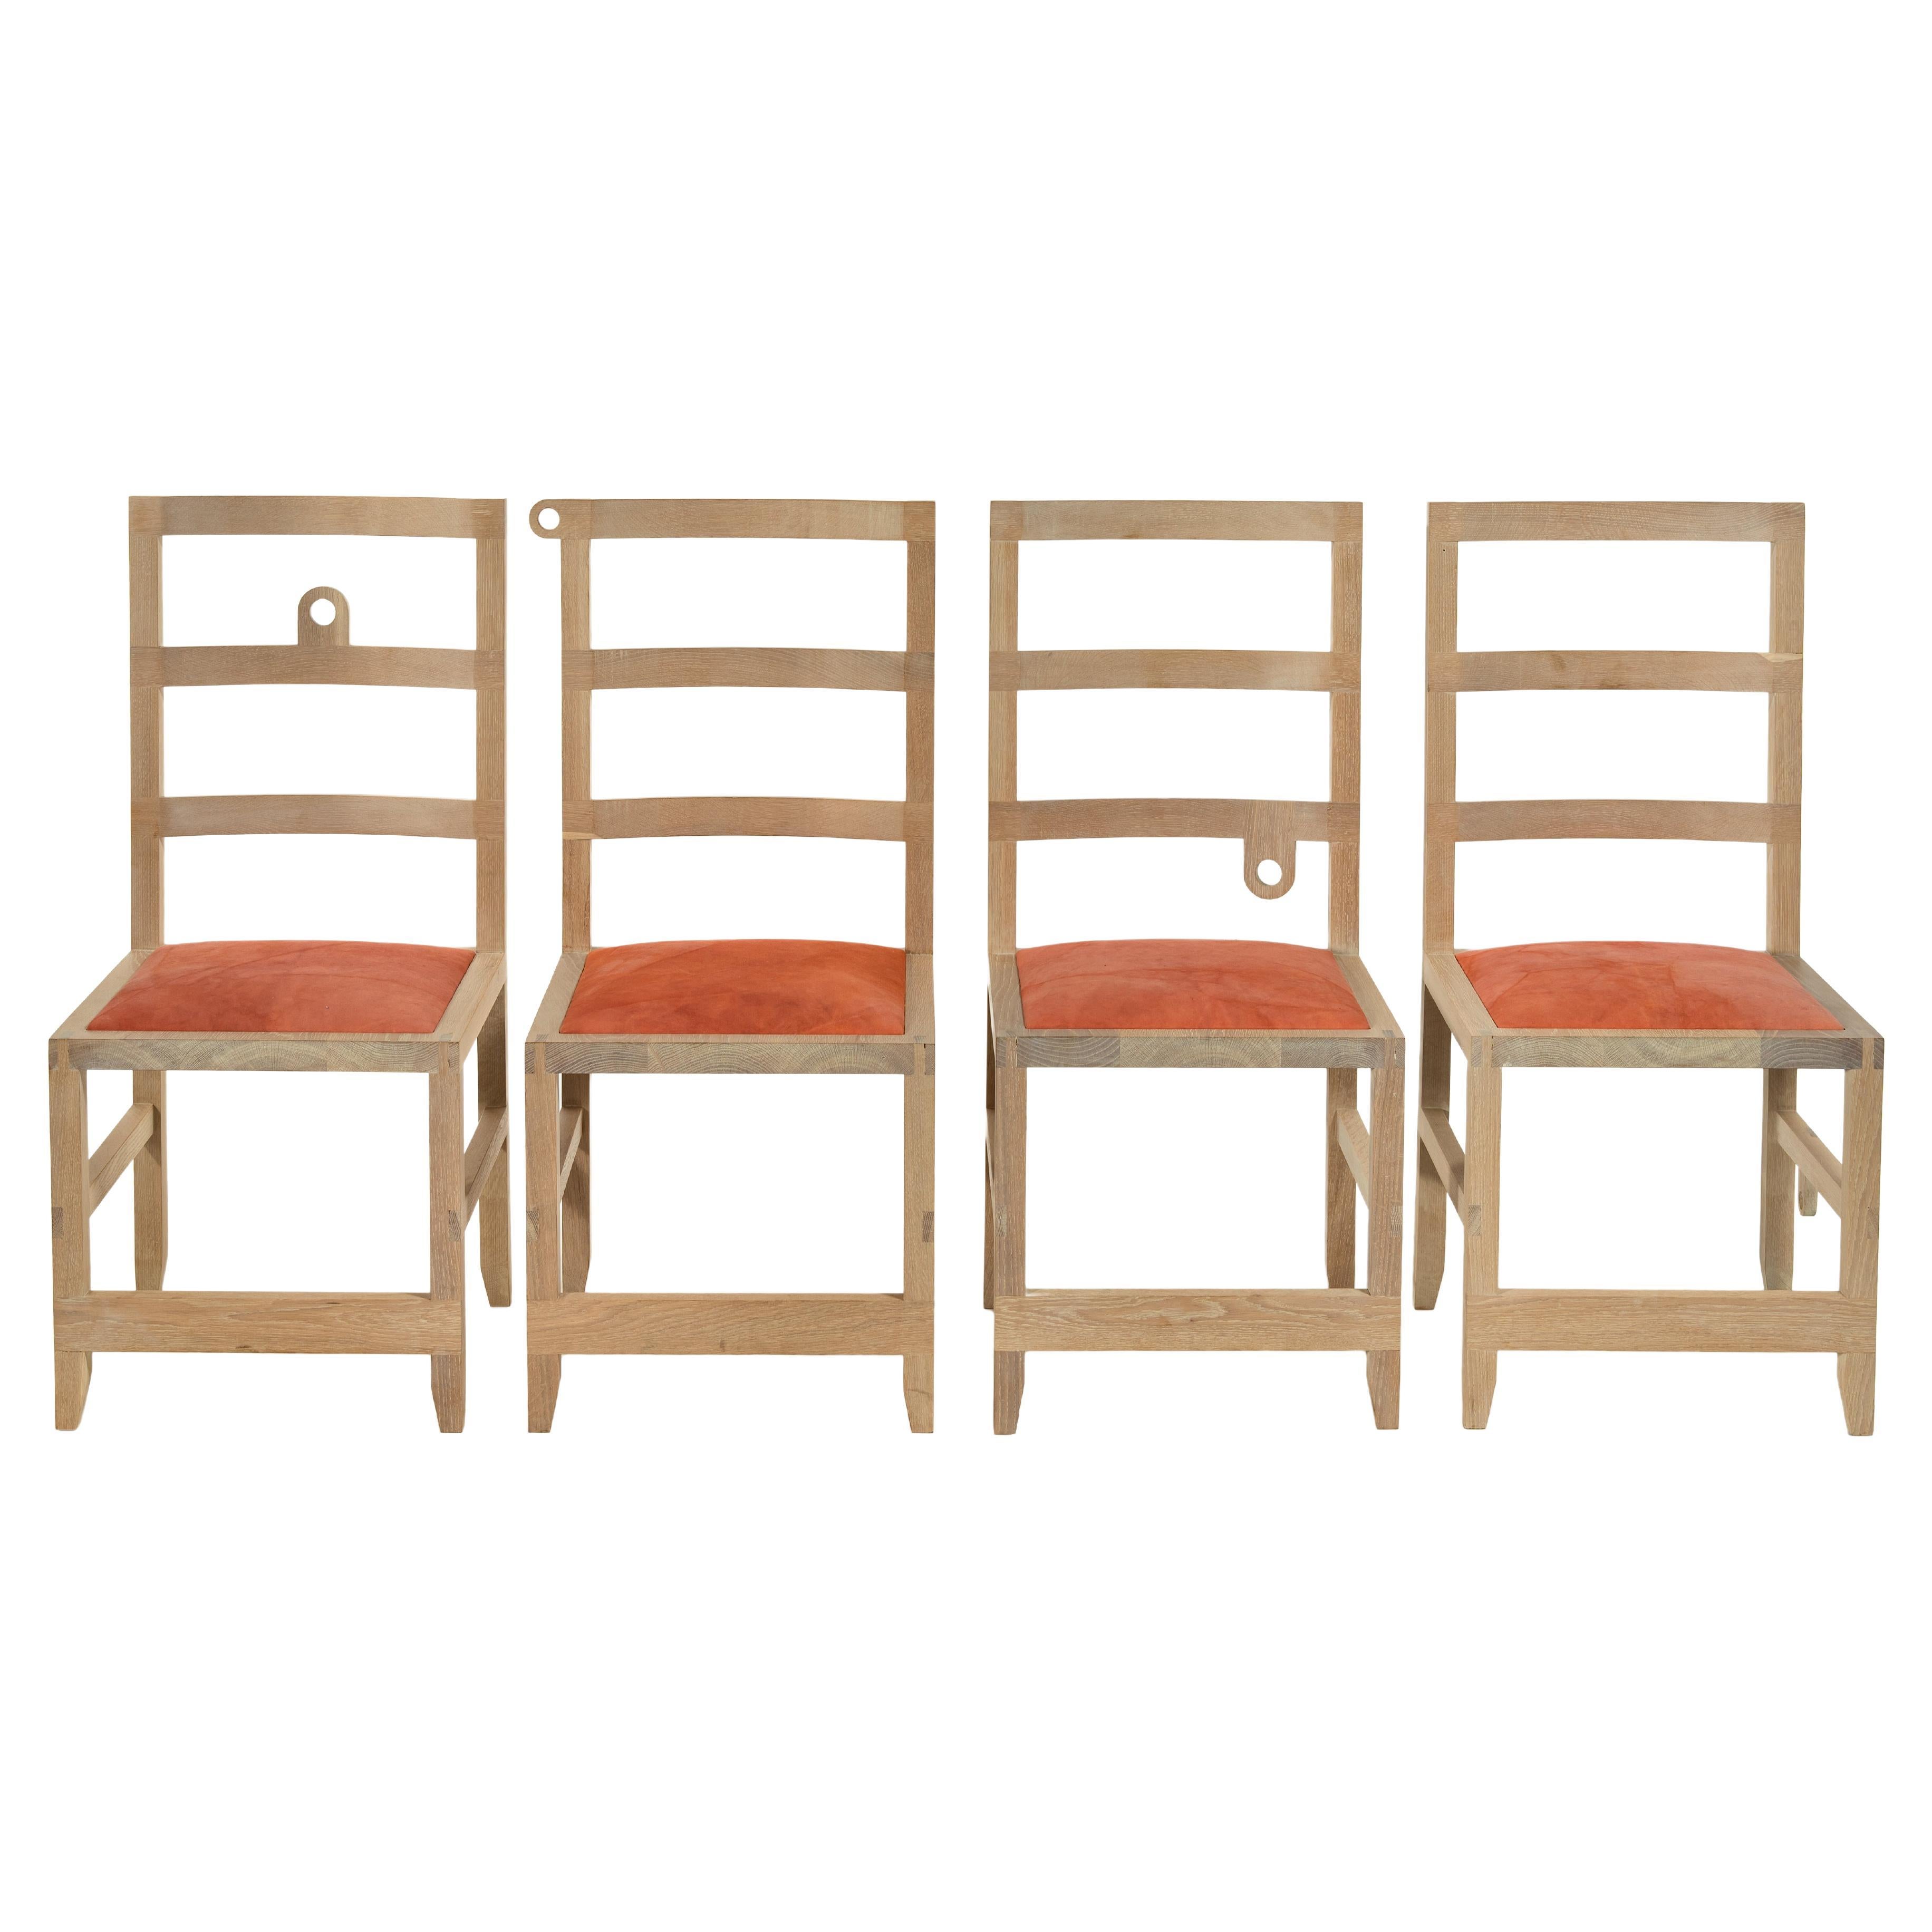 Set of 4 Monolith Ladderback Chairs by Phaedo For Sale